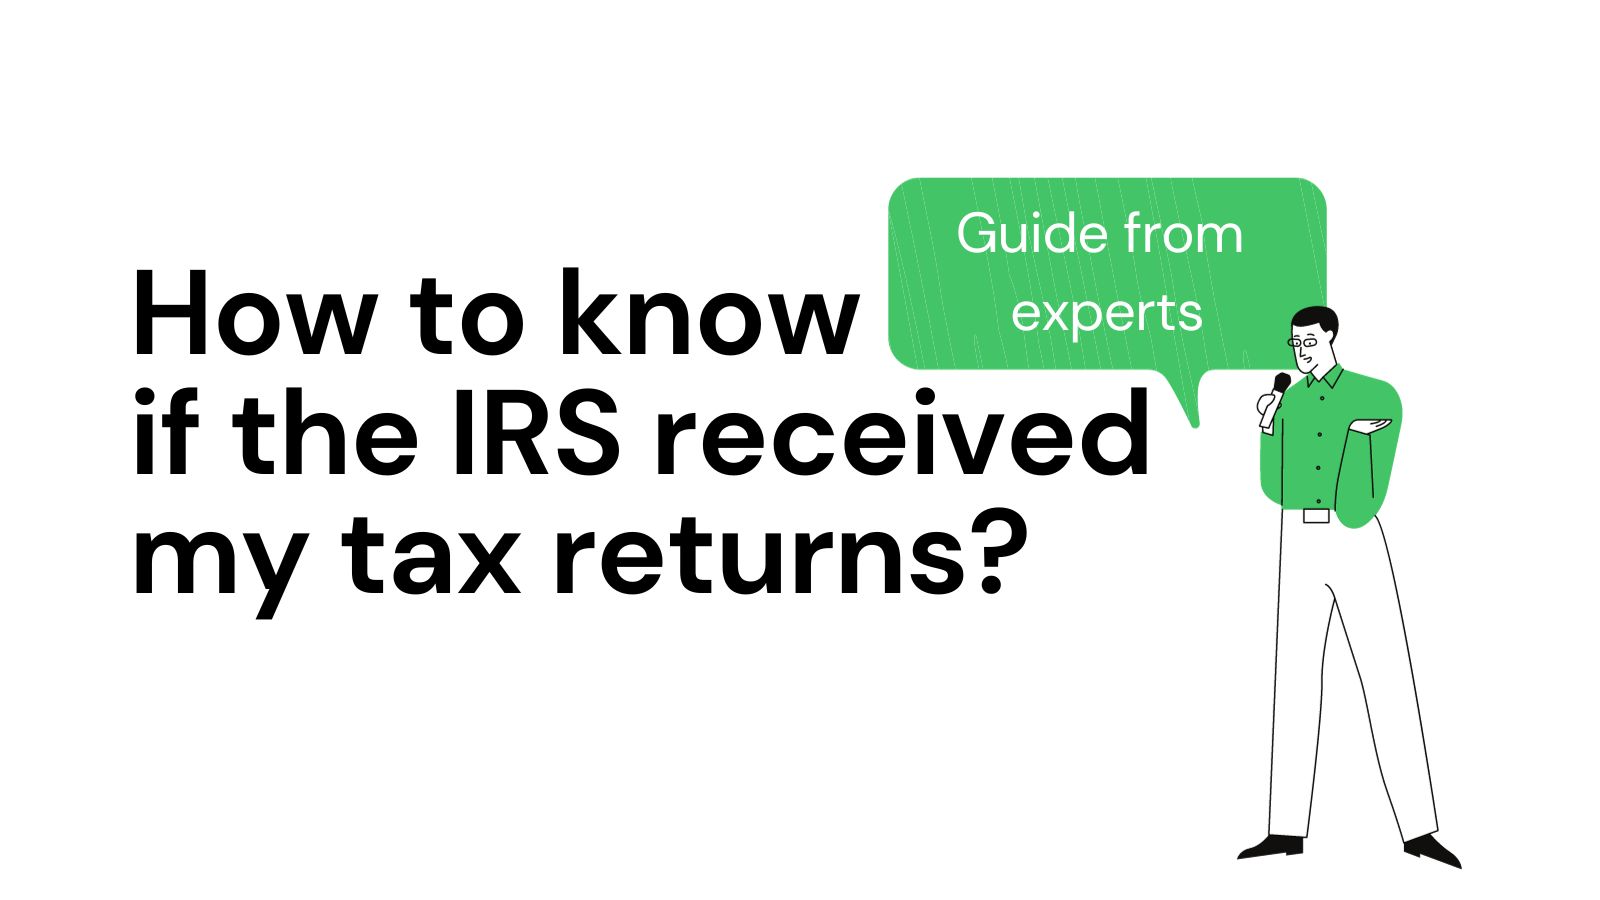 How to know if the irs received my tax returns